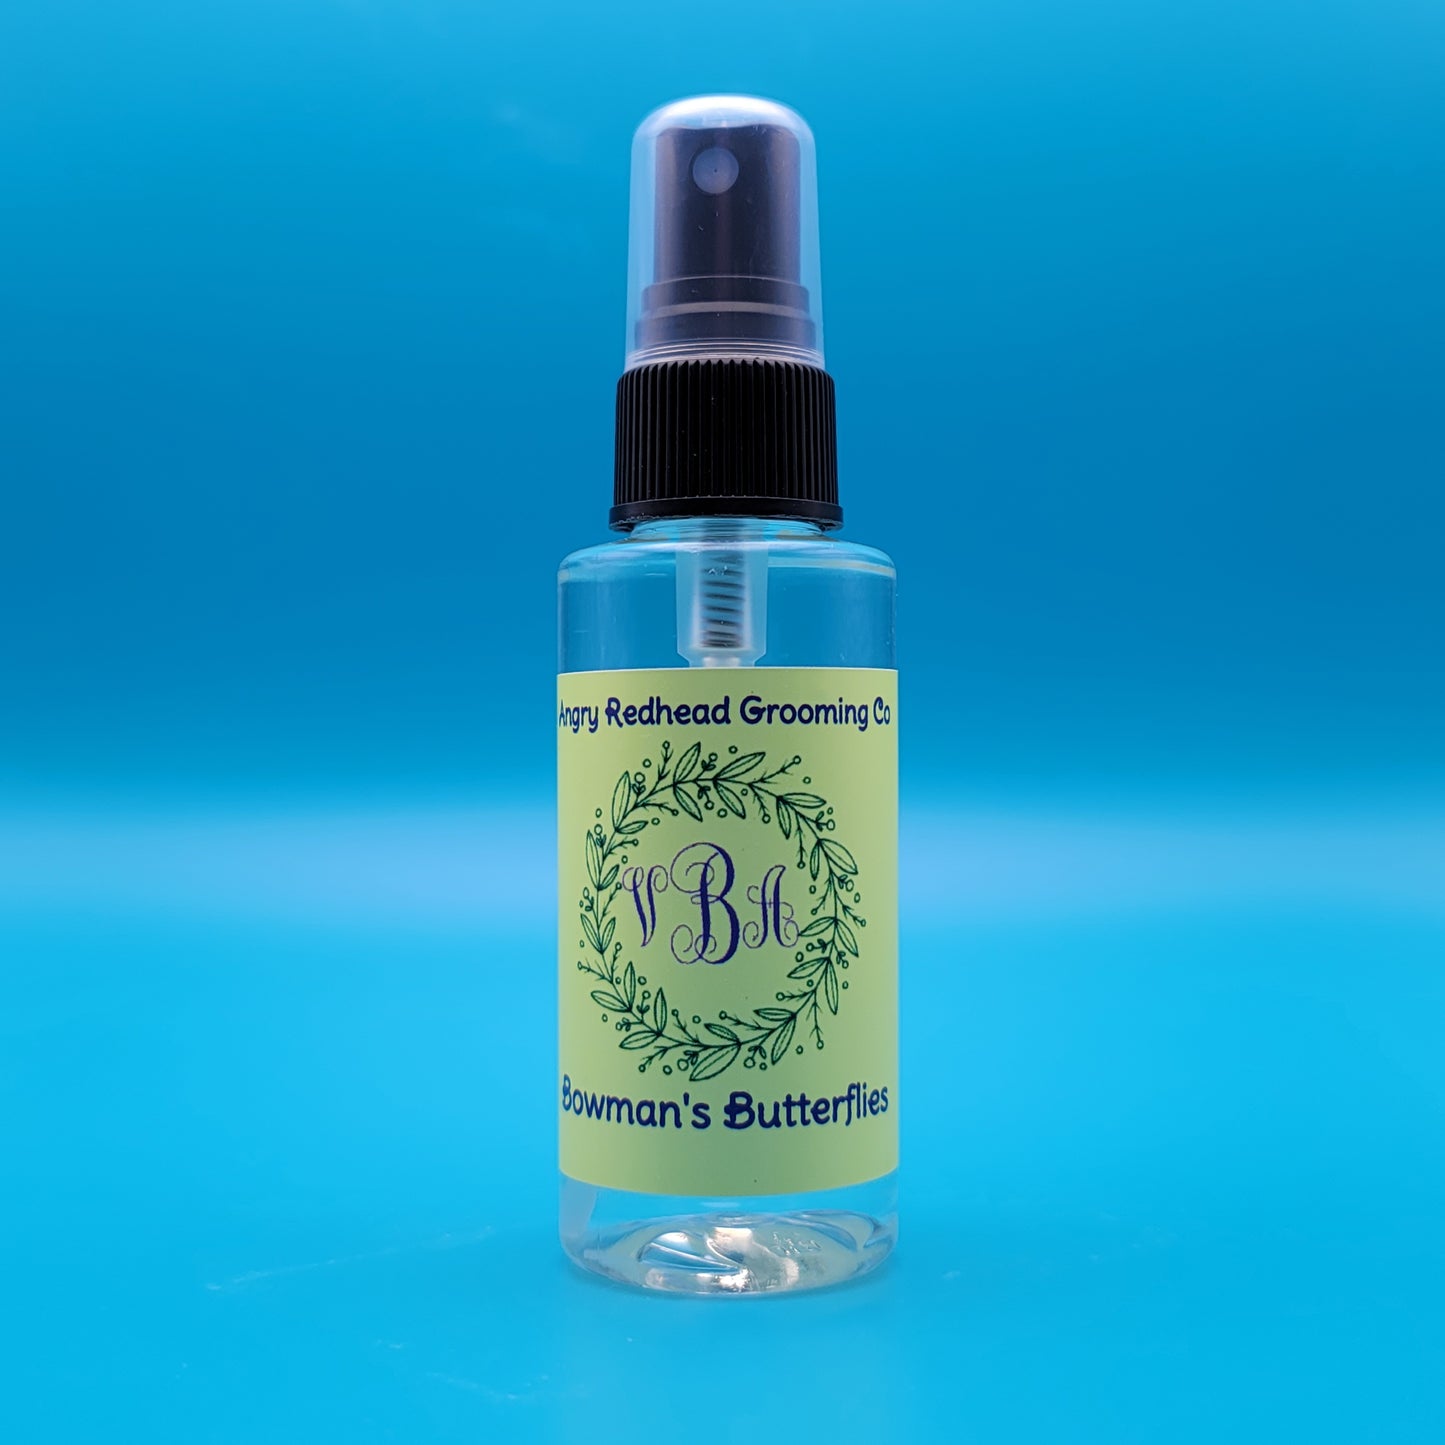 Bowman's Butterflies Cologne by Angry Redhead Grooming Co - angryredheadgrooming.com